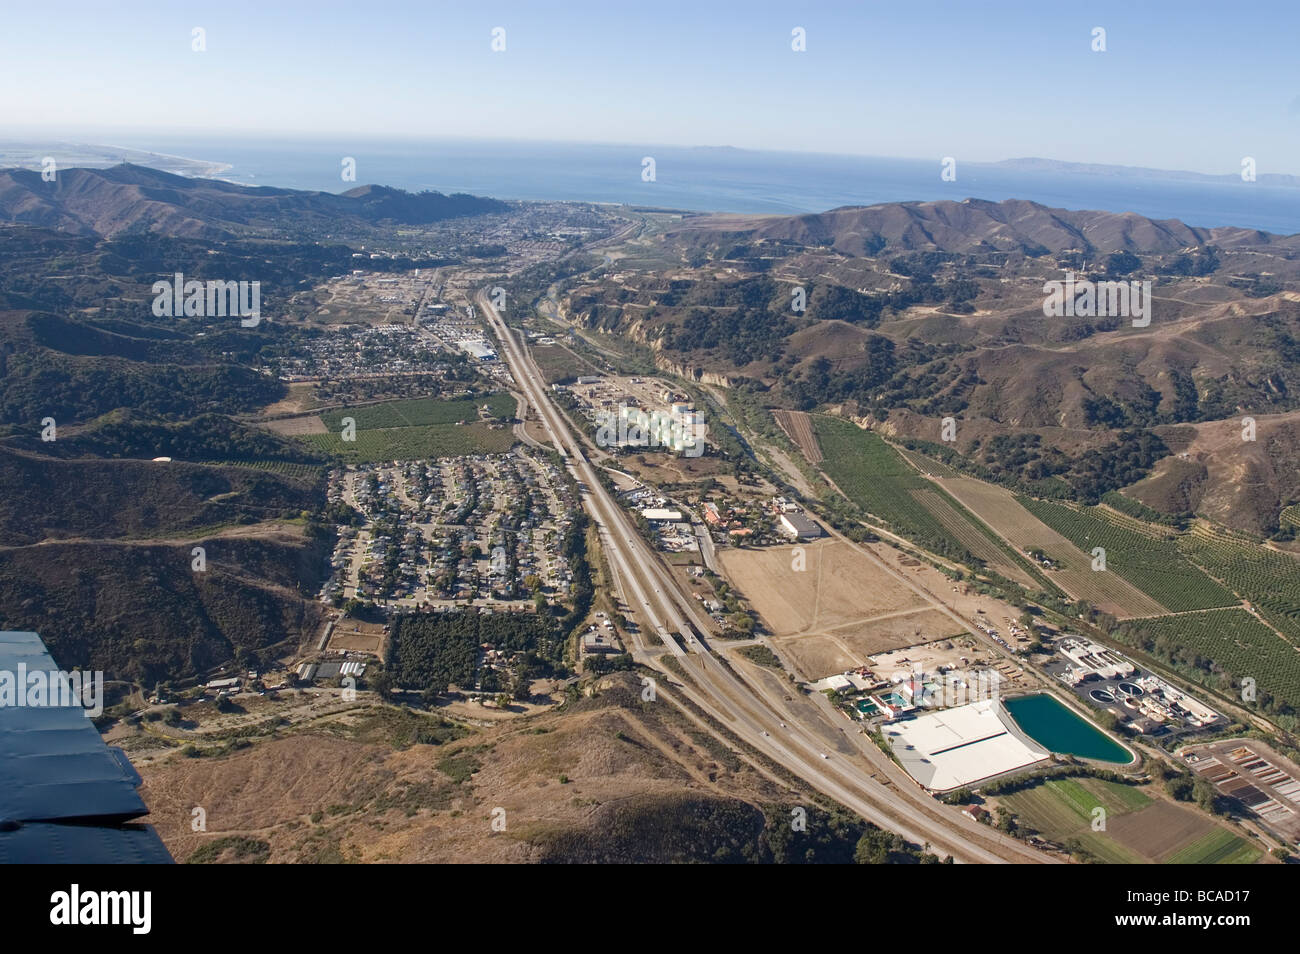 Aerial photographs over a residential neighborhood in Ventura. Stock Photo